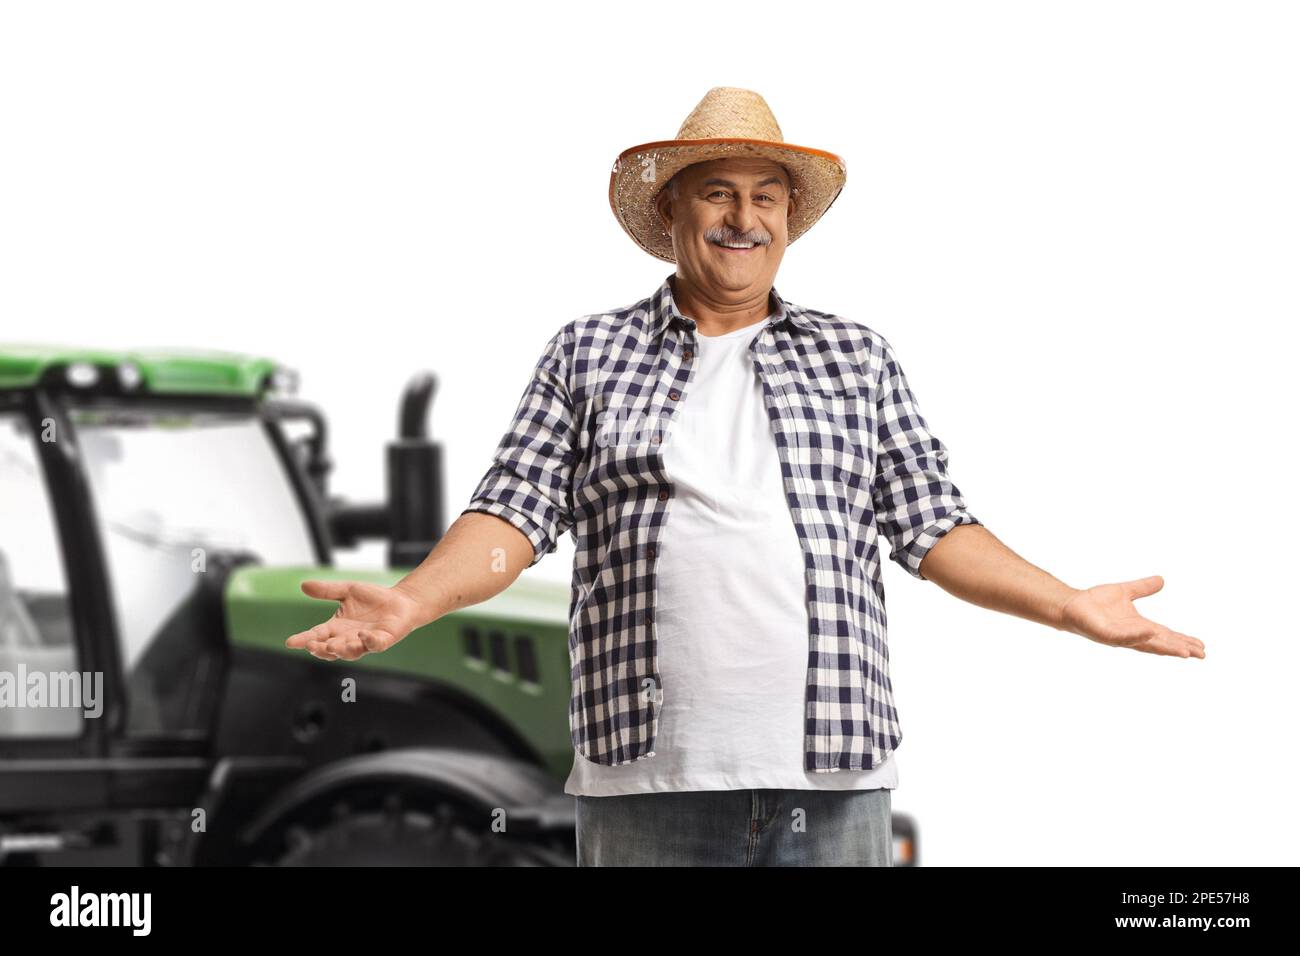 Smiling mature farmer with a straw hat gesturing with hands isolated on white background Stock Photo